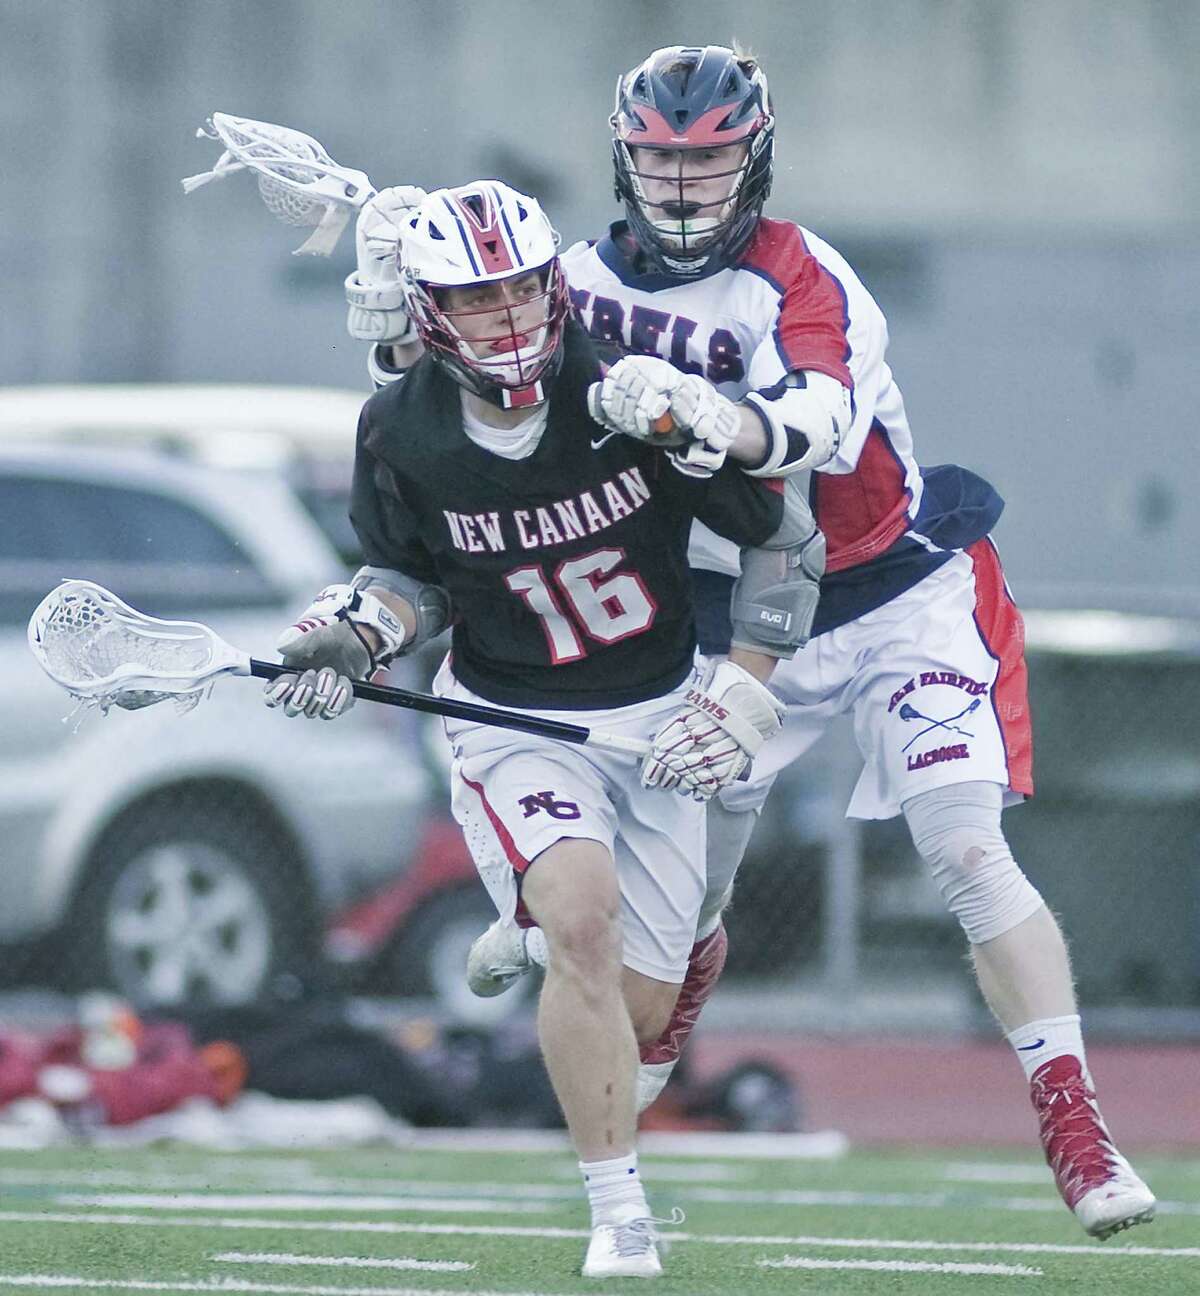 NEW CANAAN 21, NEW FAIRFIELD 6: New Canaan’s Graham Braden takes a hit from New Fairfield’s Colin Ford in the Class M boys lacrosse semifinal Wednesday at Brien McMahon High School in Norwalk